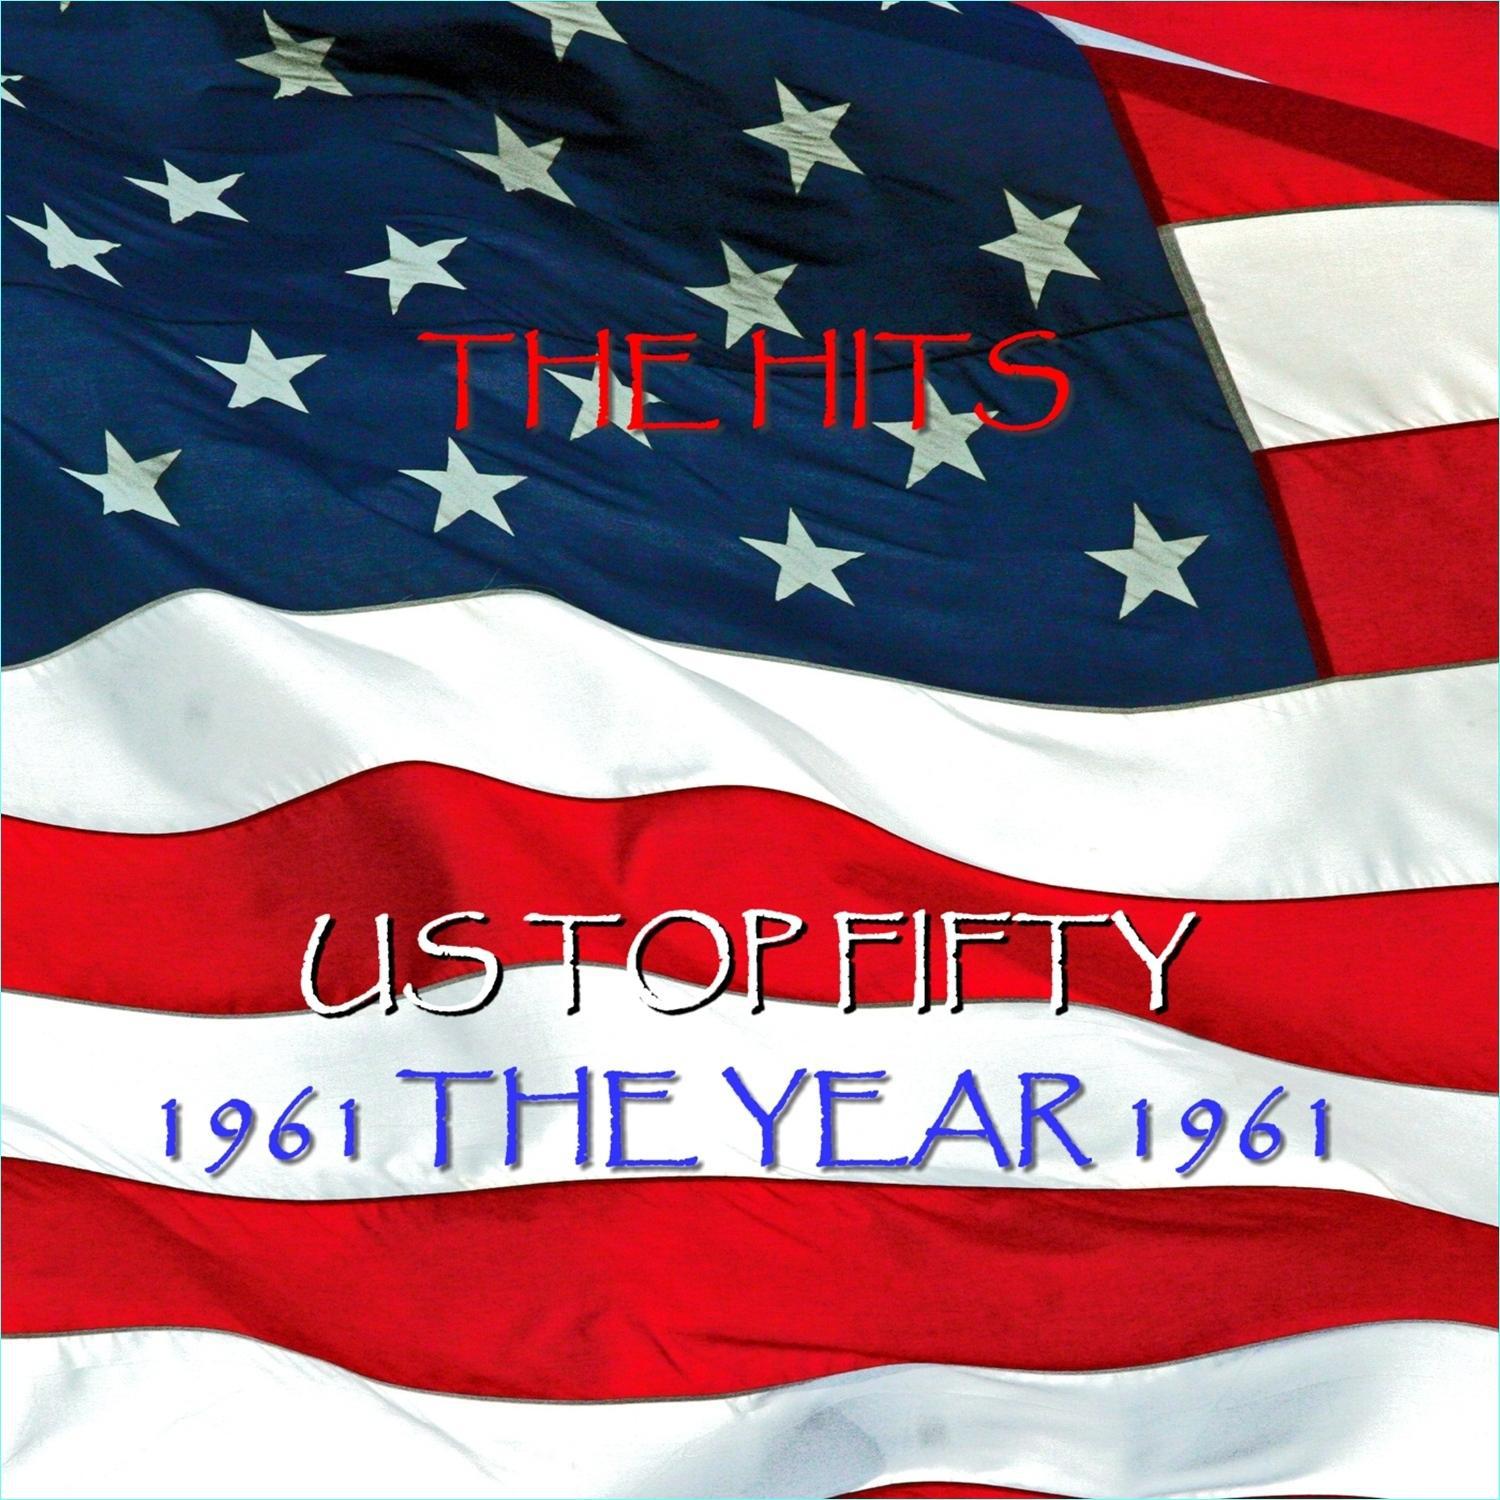 1961 - The US Top 50